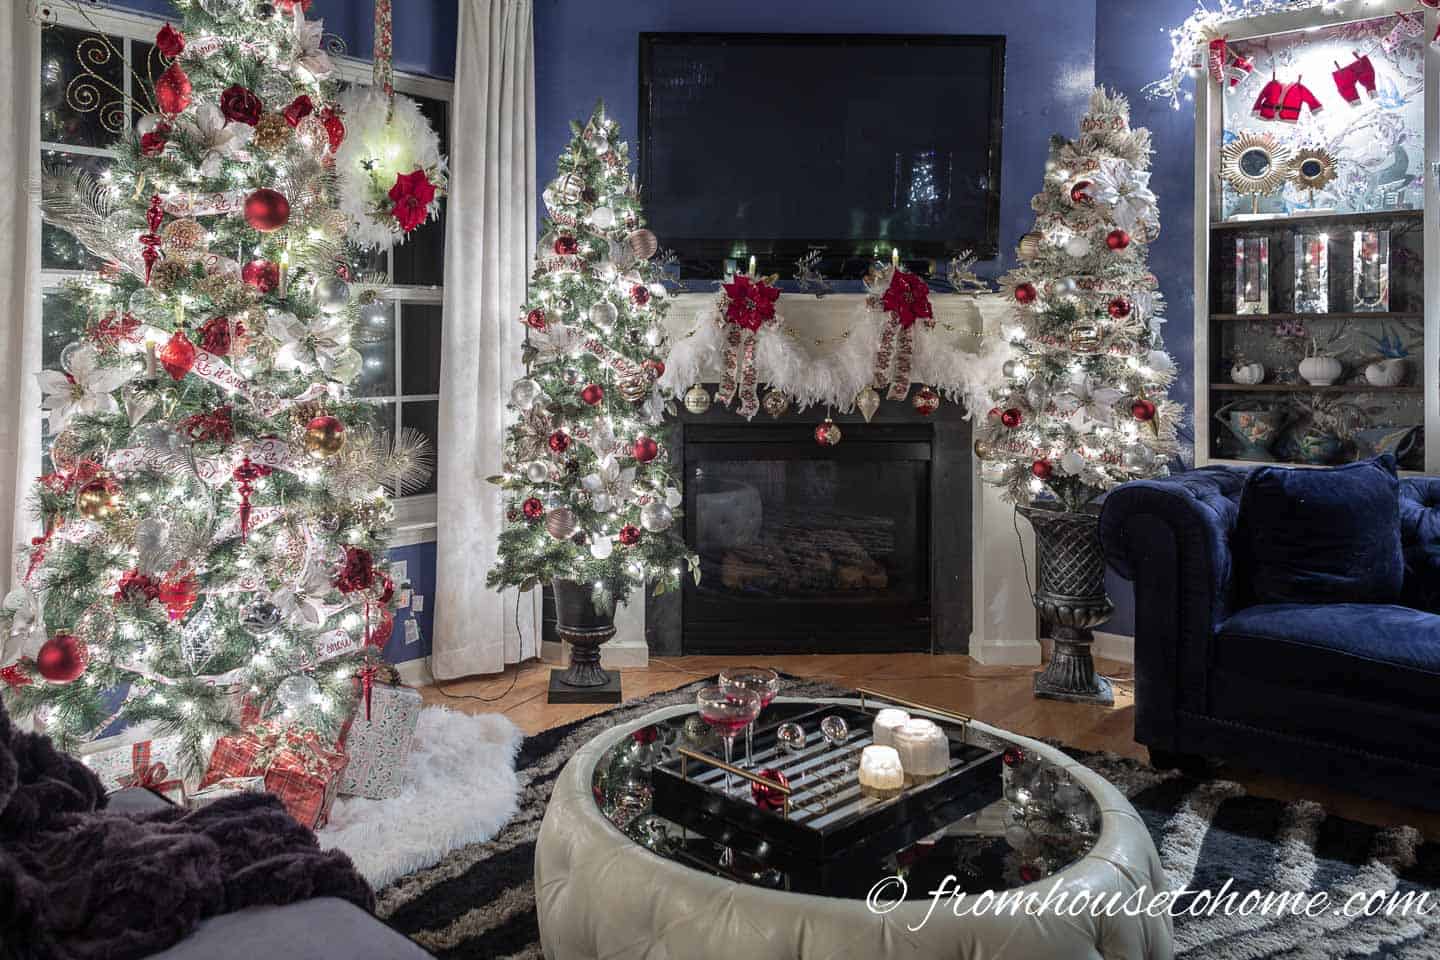 Living room with 3 Christmas trees and a fireplace decorated with red, white and gold Christmas decorations